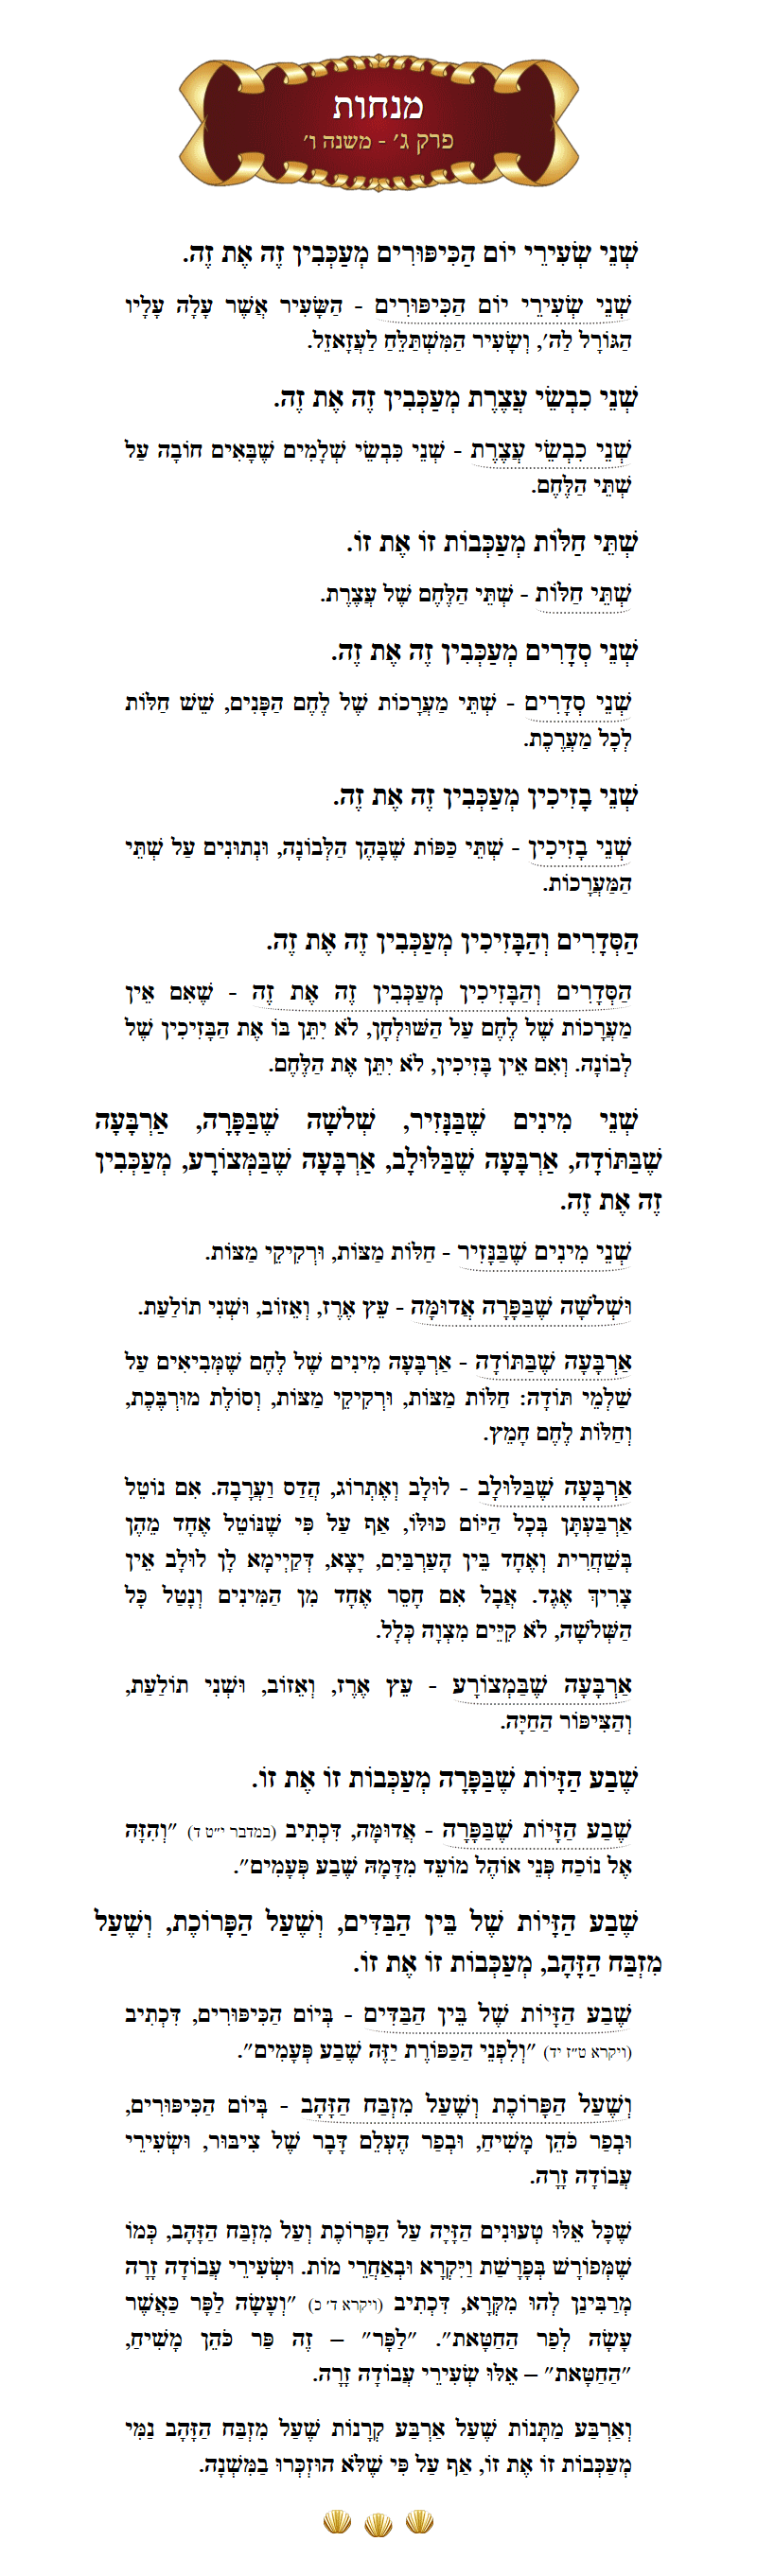 Masechta Menachos Chapter 3 Mishnah 6 with commentary